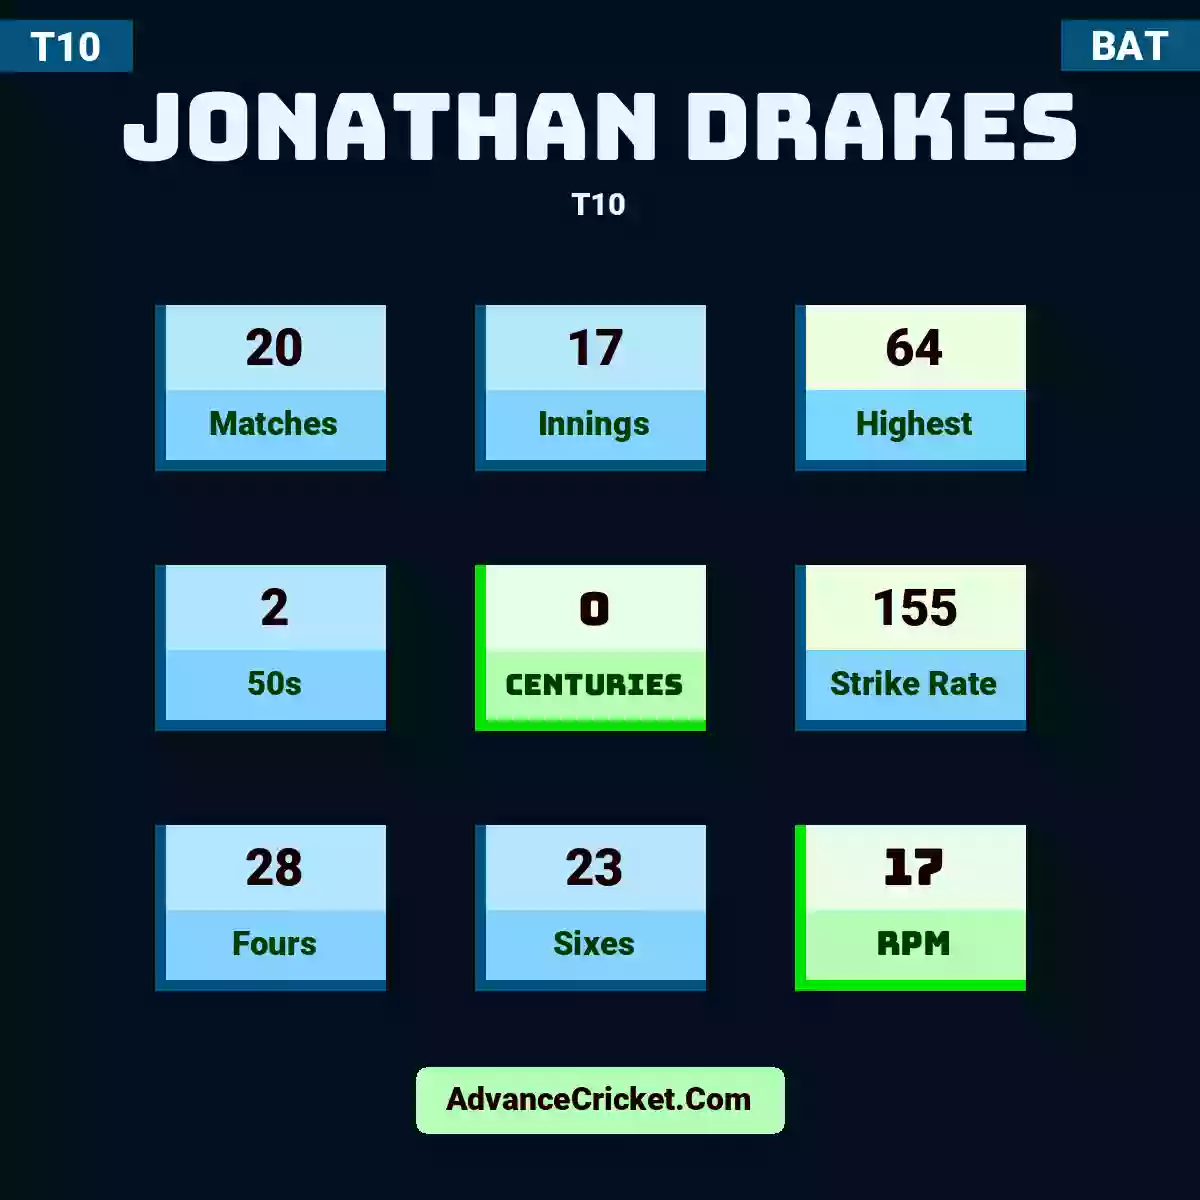 Jonathan Drakes T10 , Jonathan Drakes played 20 matches, scored 64 runs as highest, 2 half-centuries, and 0 centuries, with a strike rate of 155. J.Drakes hit 28 fours and 23 sixes, with an RPM of 17.